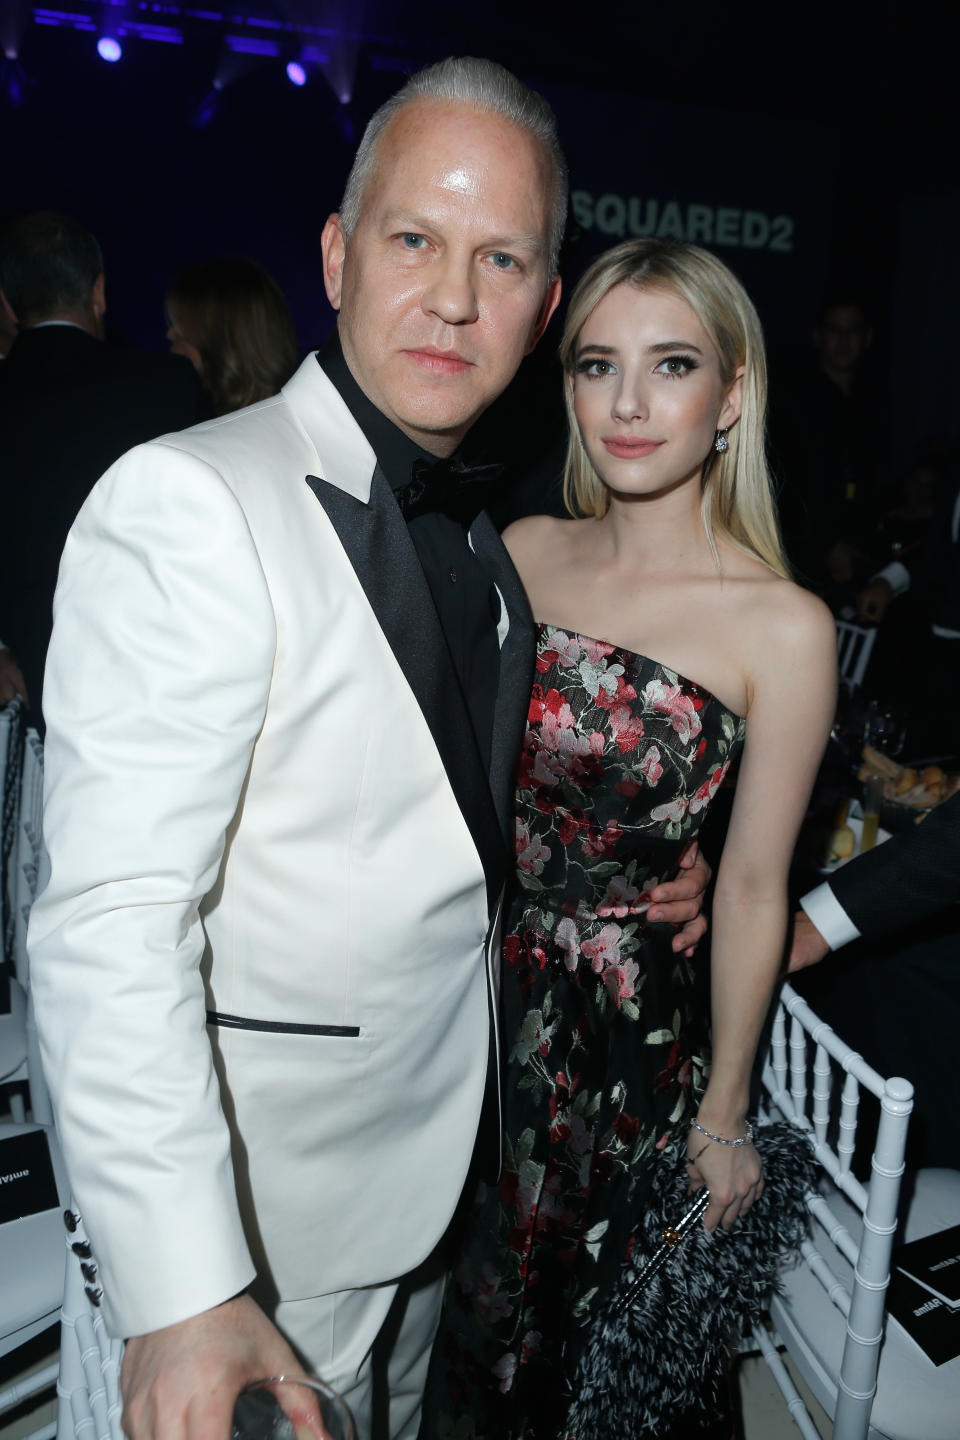 Ryan Murphy in a suit with black accents, poses with Emma Roberts wearing a floral strapless dress, at an event